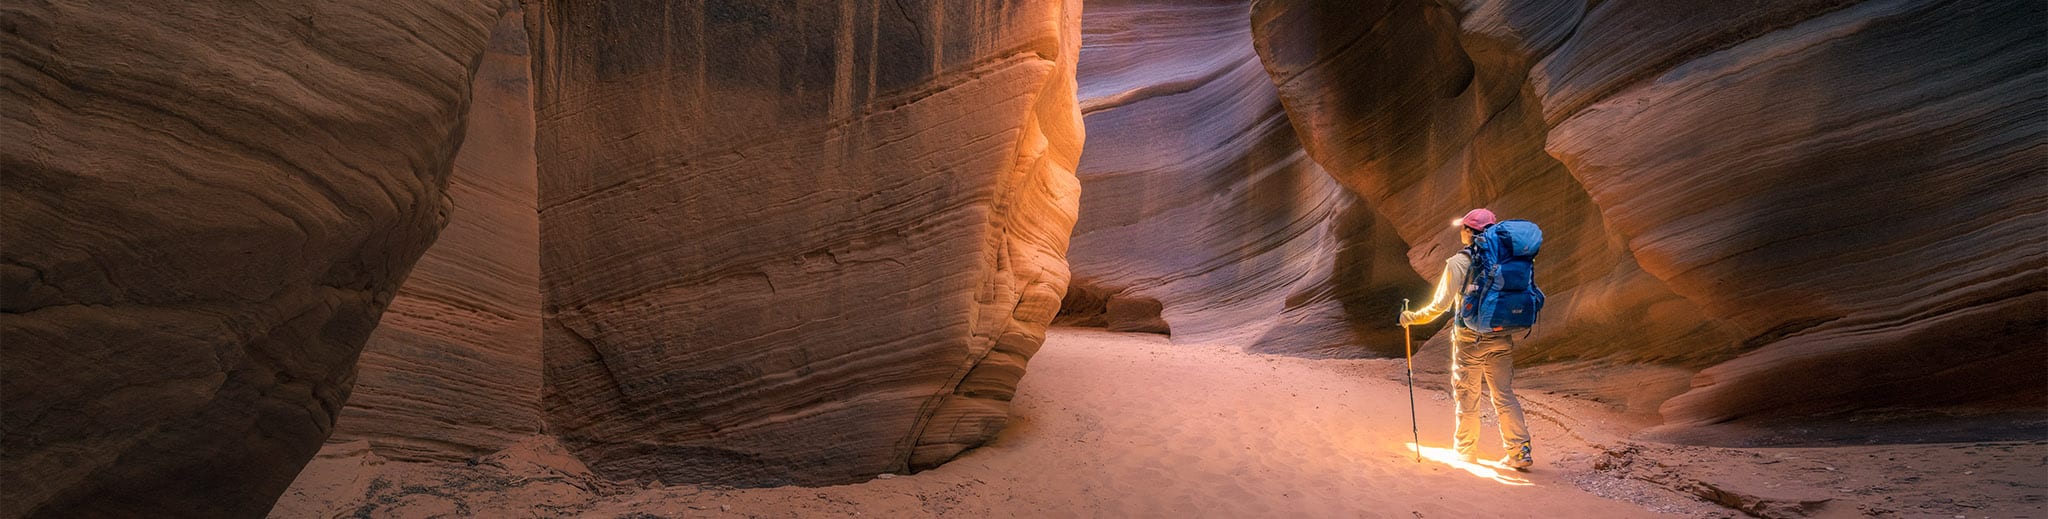 One thing I love about slot canyons is that the light is always changing, depending on the time of year and time of day you visit. And in photography, it really is all about the light!  On this hike, we were mesmerized for hours by the undulating swirls and textures of the sandstone slot. When we rounded a bend a saw this one small beam of light entering the canyon, I hurried and setup my gear and captured Evelyn before the light disappeared.  This is a single exposure image taken from a tripod.  I used ISO 800 to get a short enough shutter speed to render Evelyn sharp.